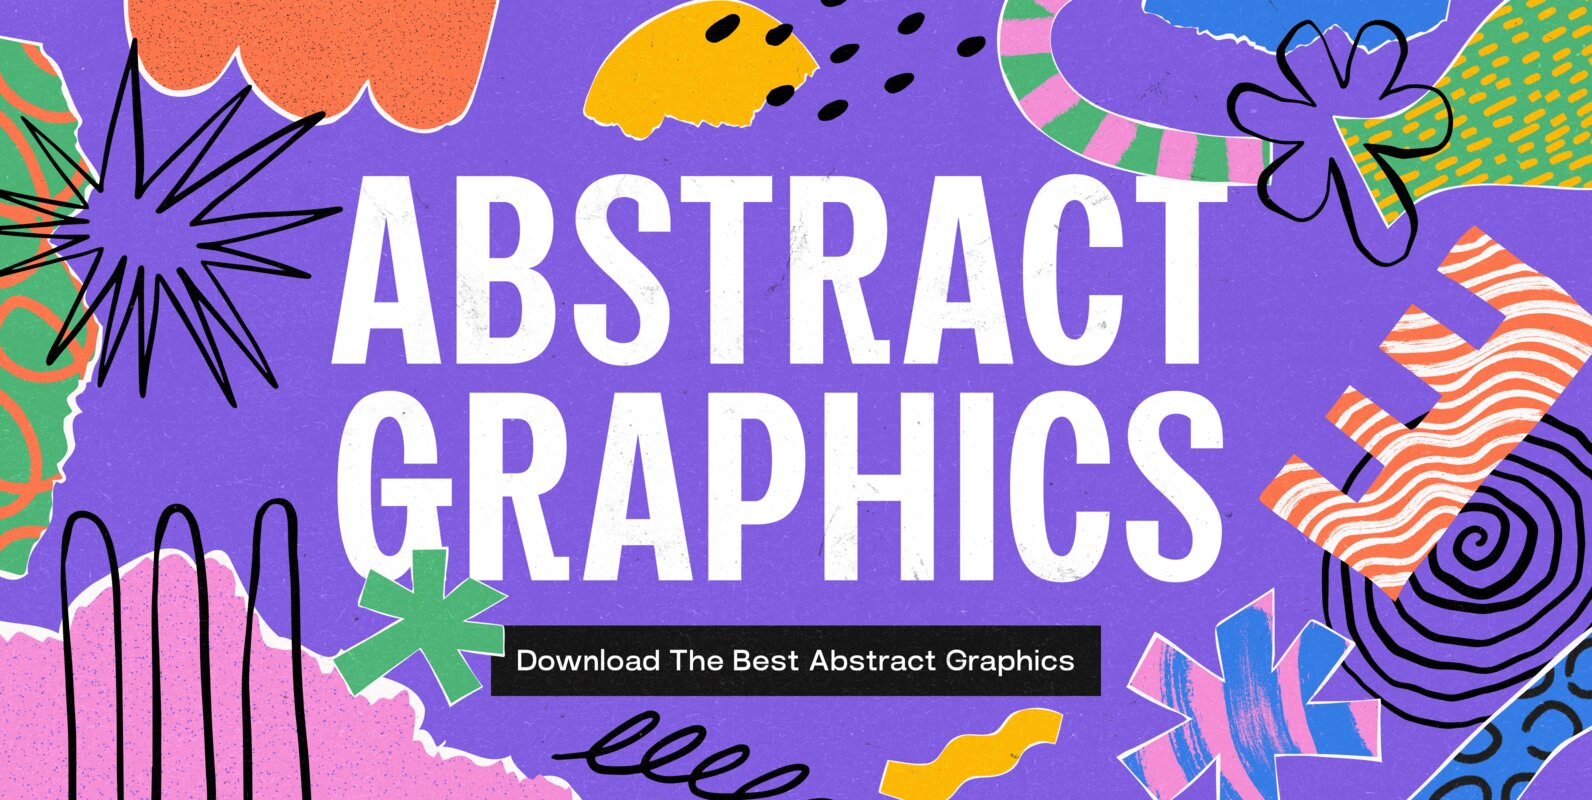 The Best Abstract Graphics